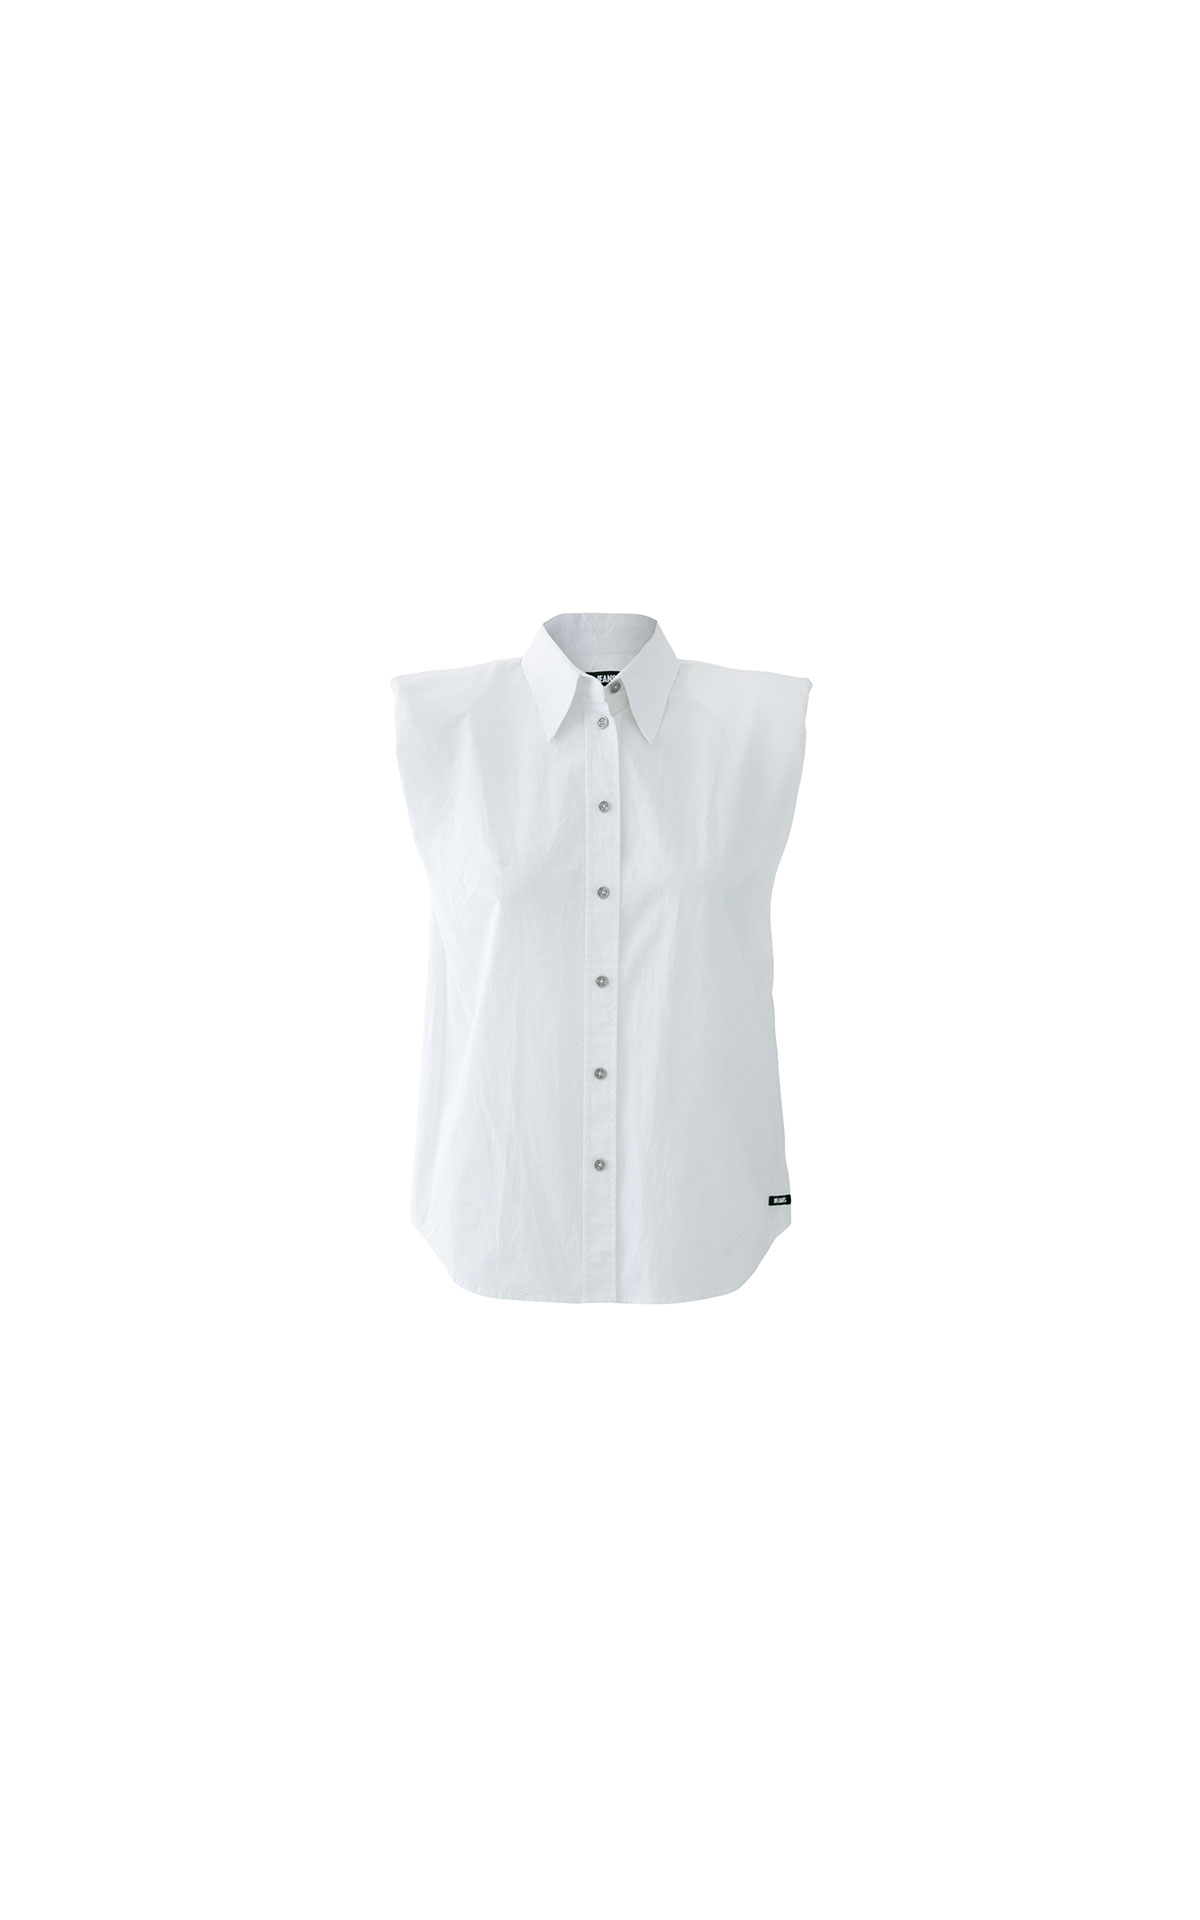 DKNY Sleeveless shirt from Bicester Village